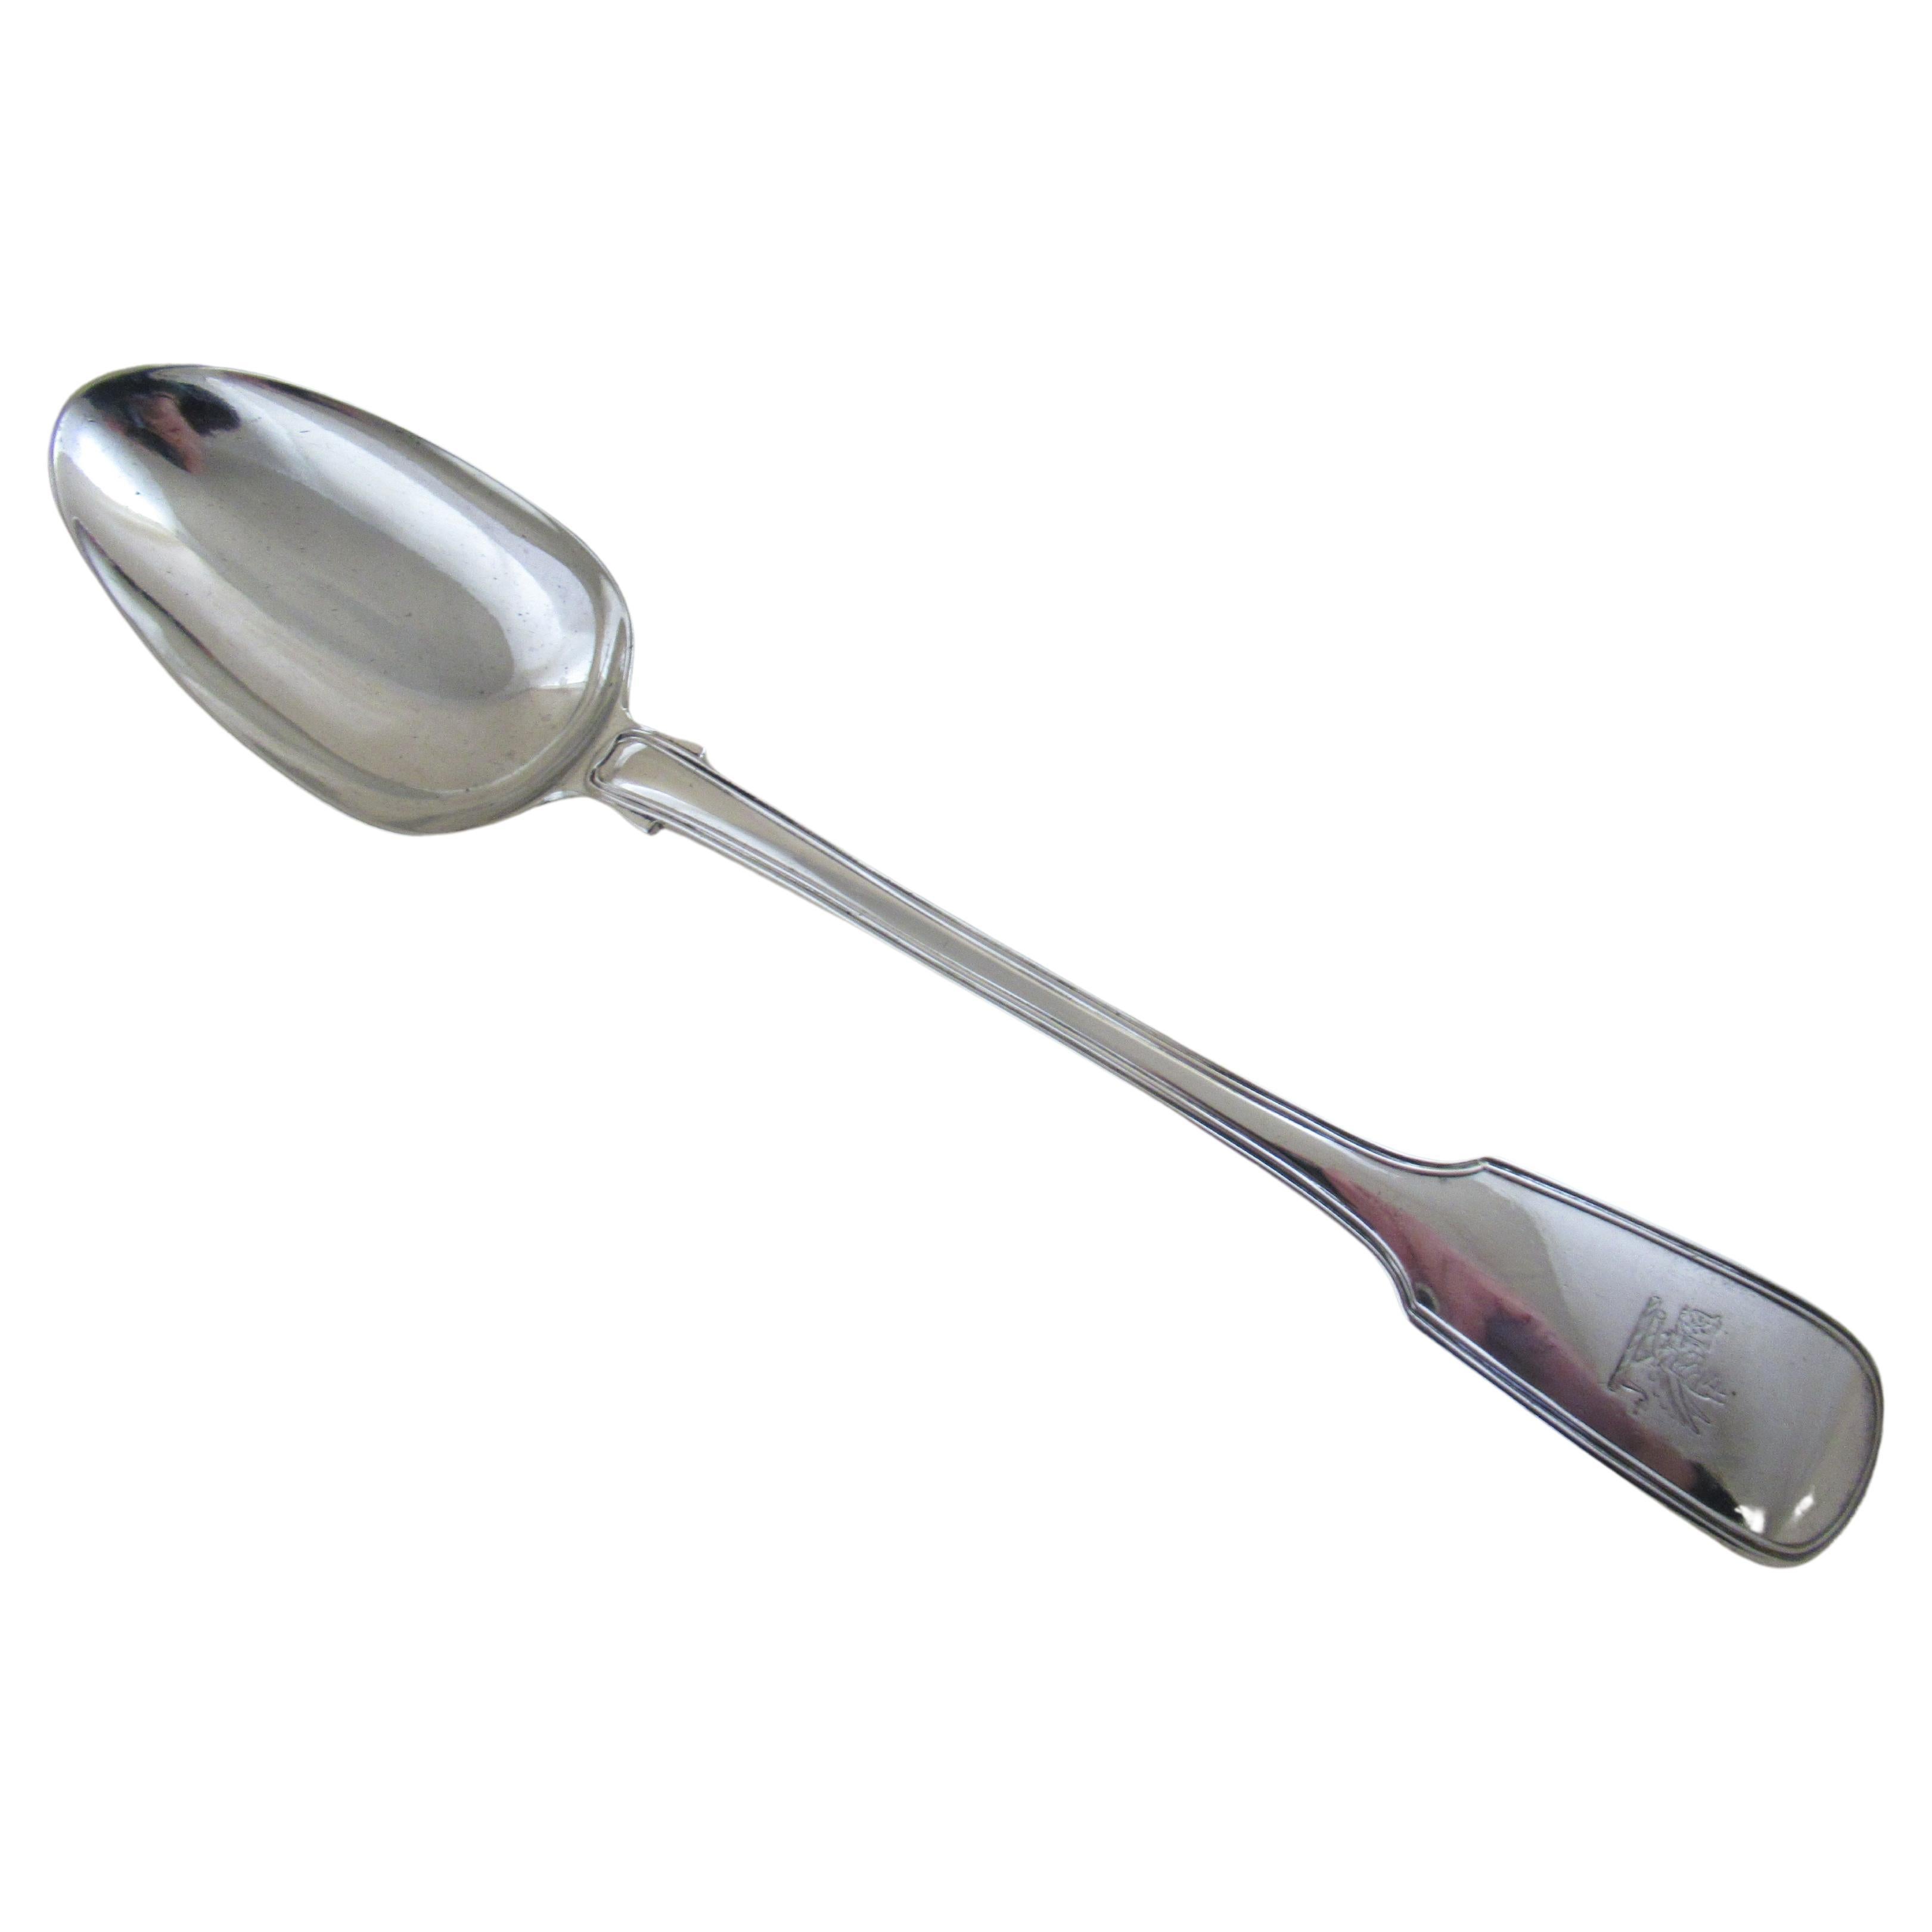 Sterling Silver English Fiddle & Thread Serving Spoon, Hallmarked:-London, 1843